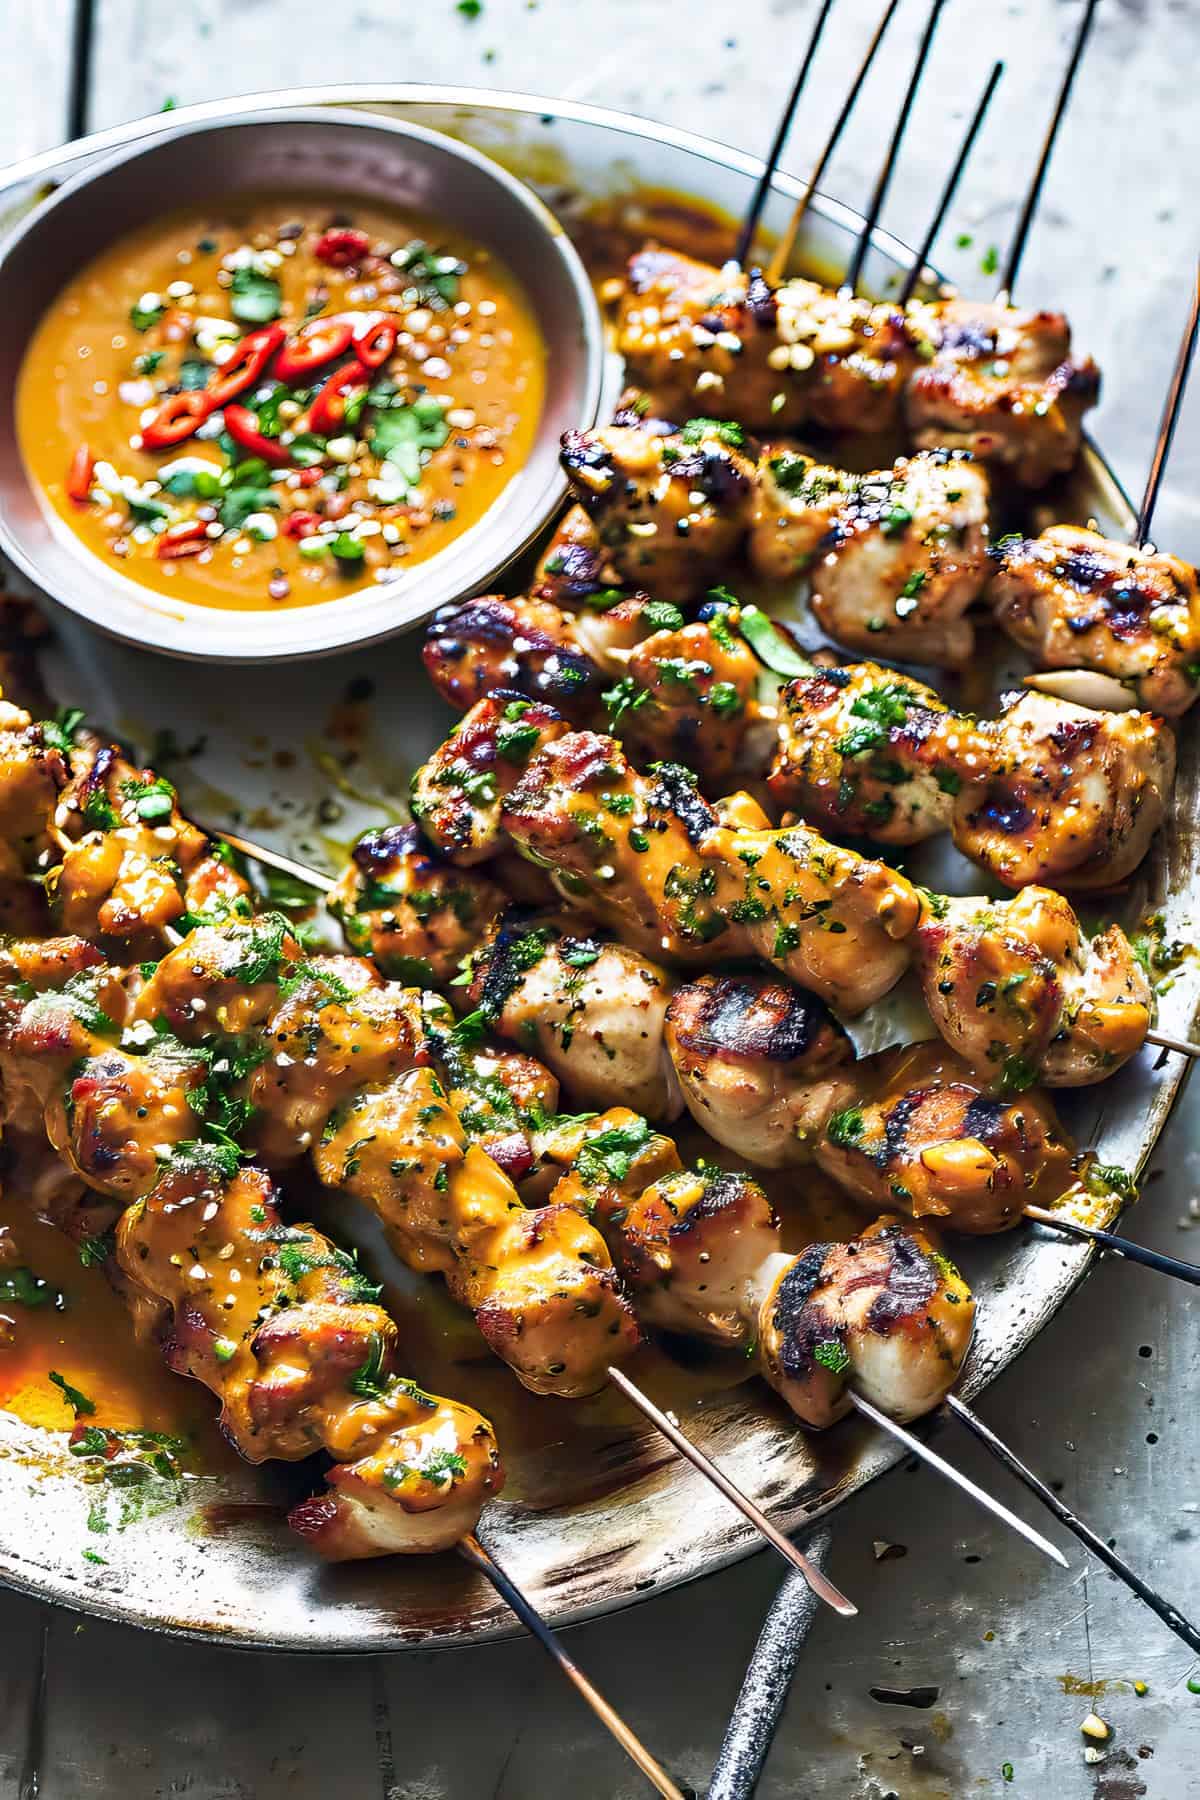 Thai coconut chicken skewers with spices on them on a plate with a dipping sauce.